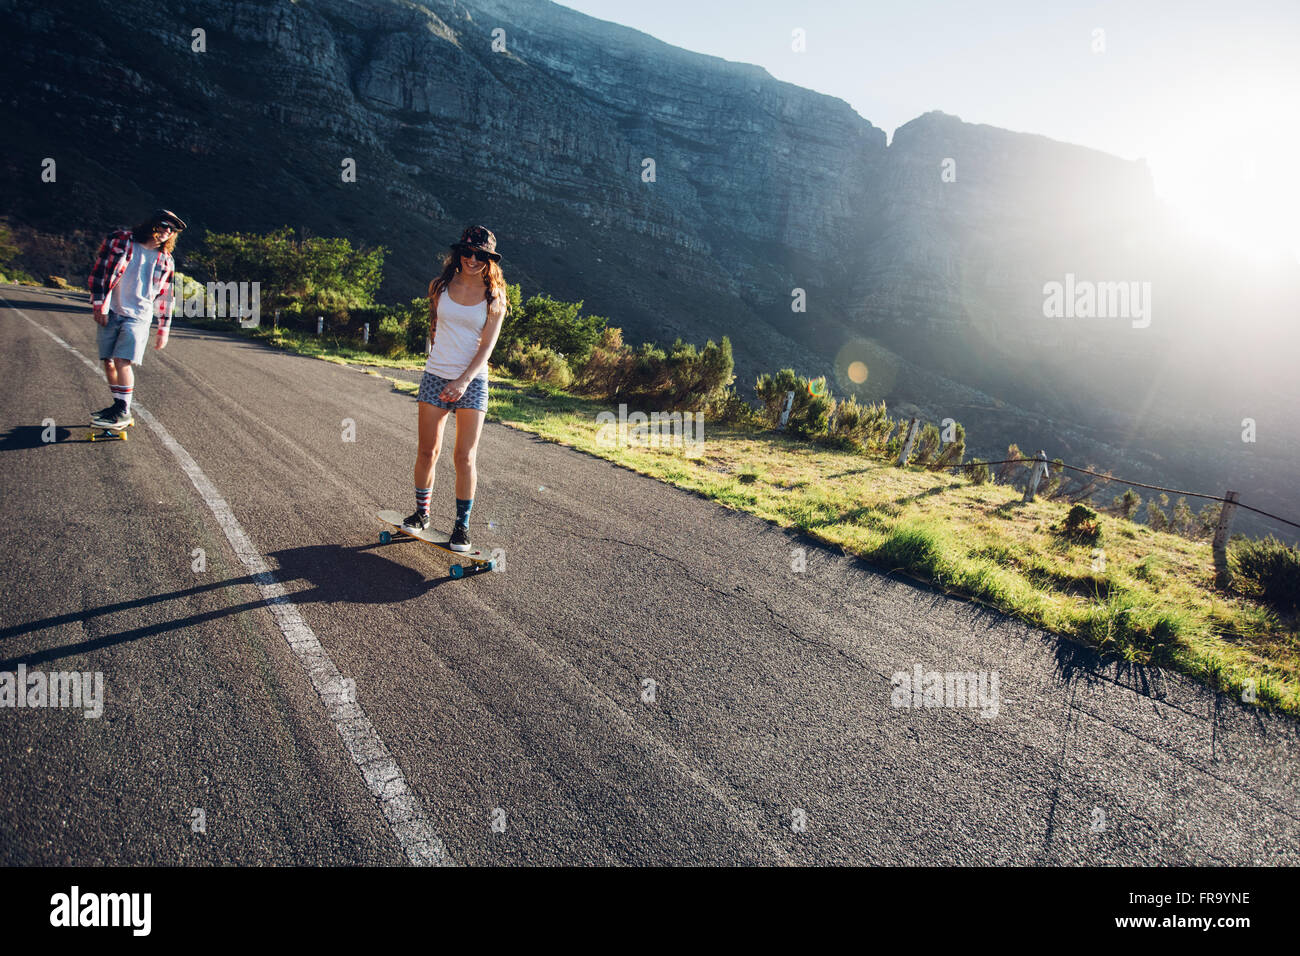 Two young people skating outdoors on rural road. Man and woman longboarding on a summer day. Stock Photo